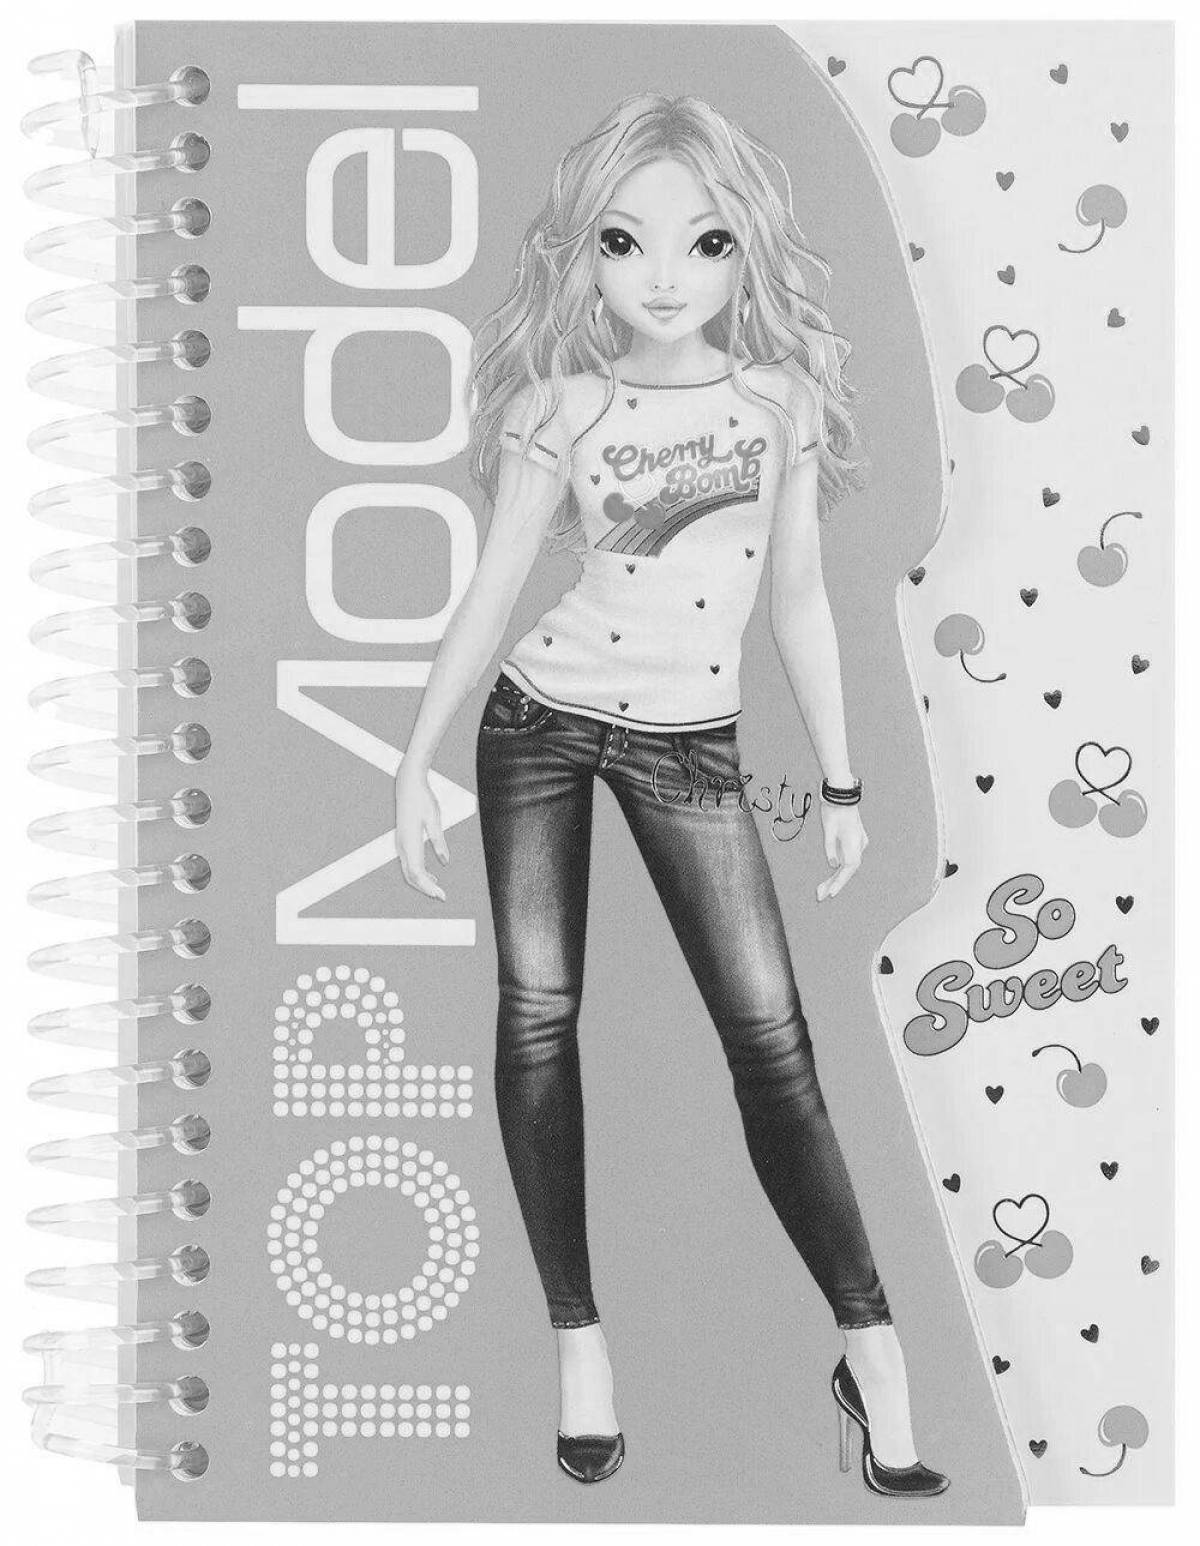 Fun coloring notebook for girls